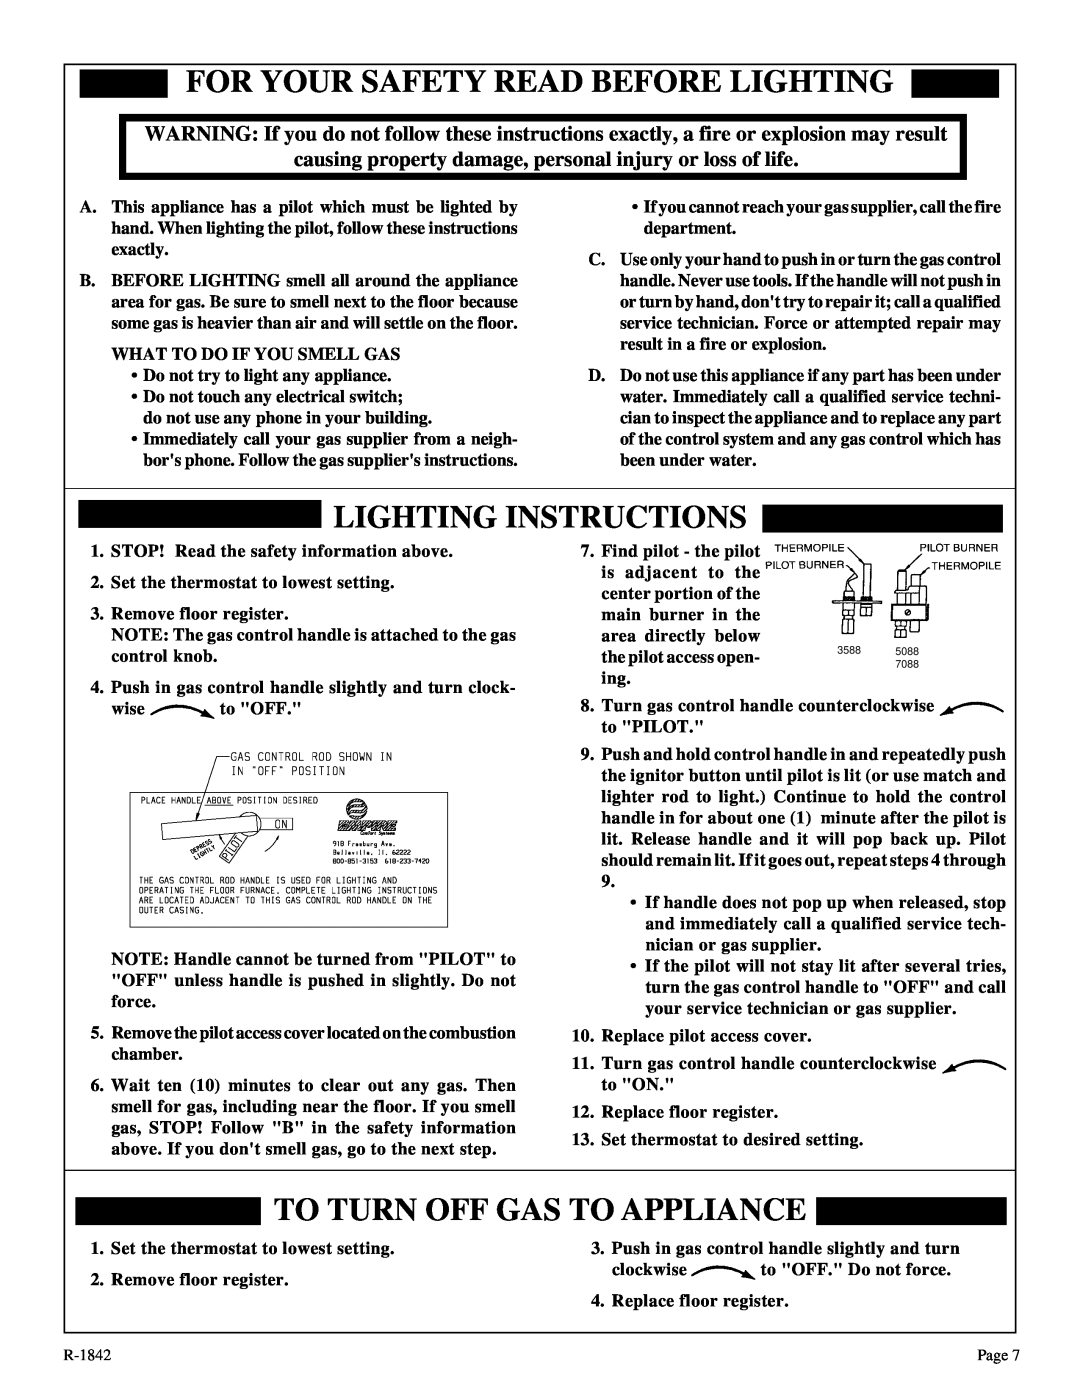 Empire Comfort Systems 7088-3 For Your Safety Read Before Lighting, Lighting Instructions, To Turn Off Gas To Appliance 